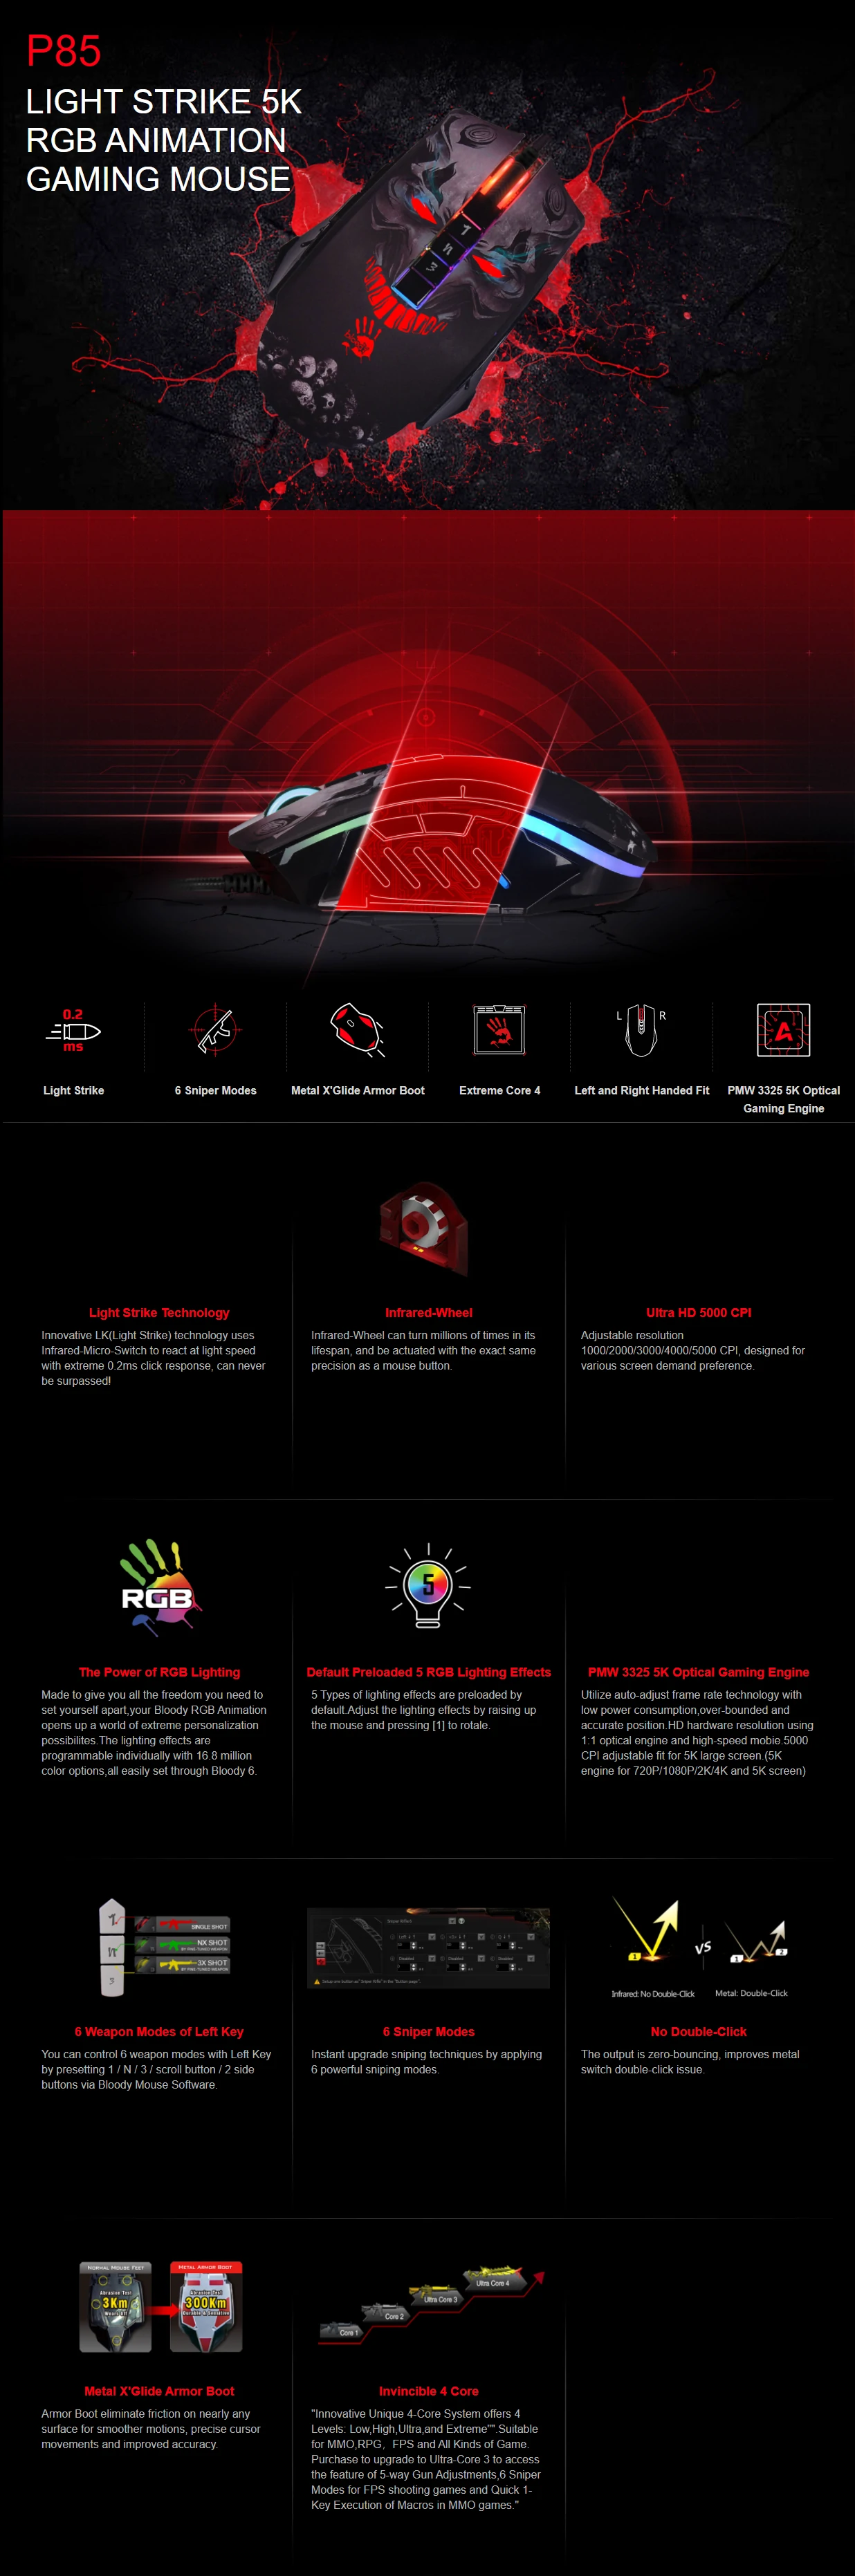 Overview - Bloody - P85 Light Stike 5K RGB Animation Gaming Mouse